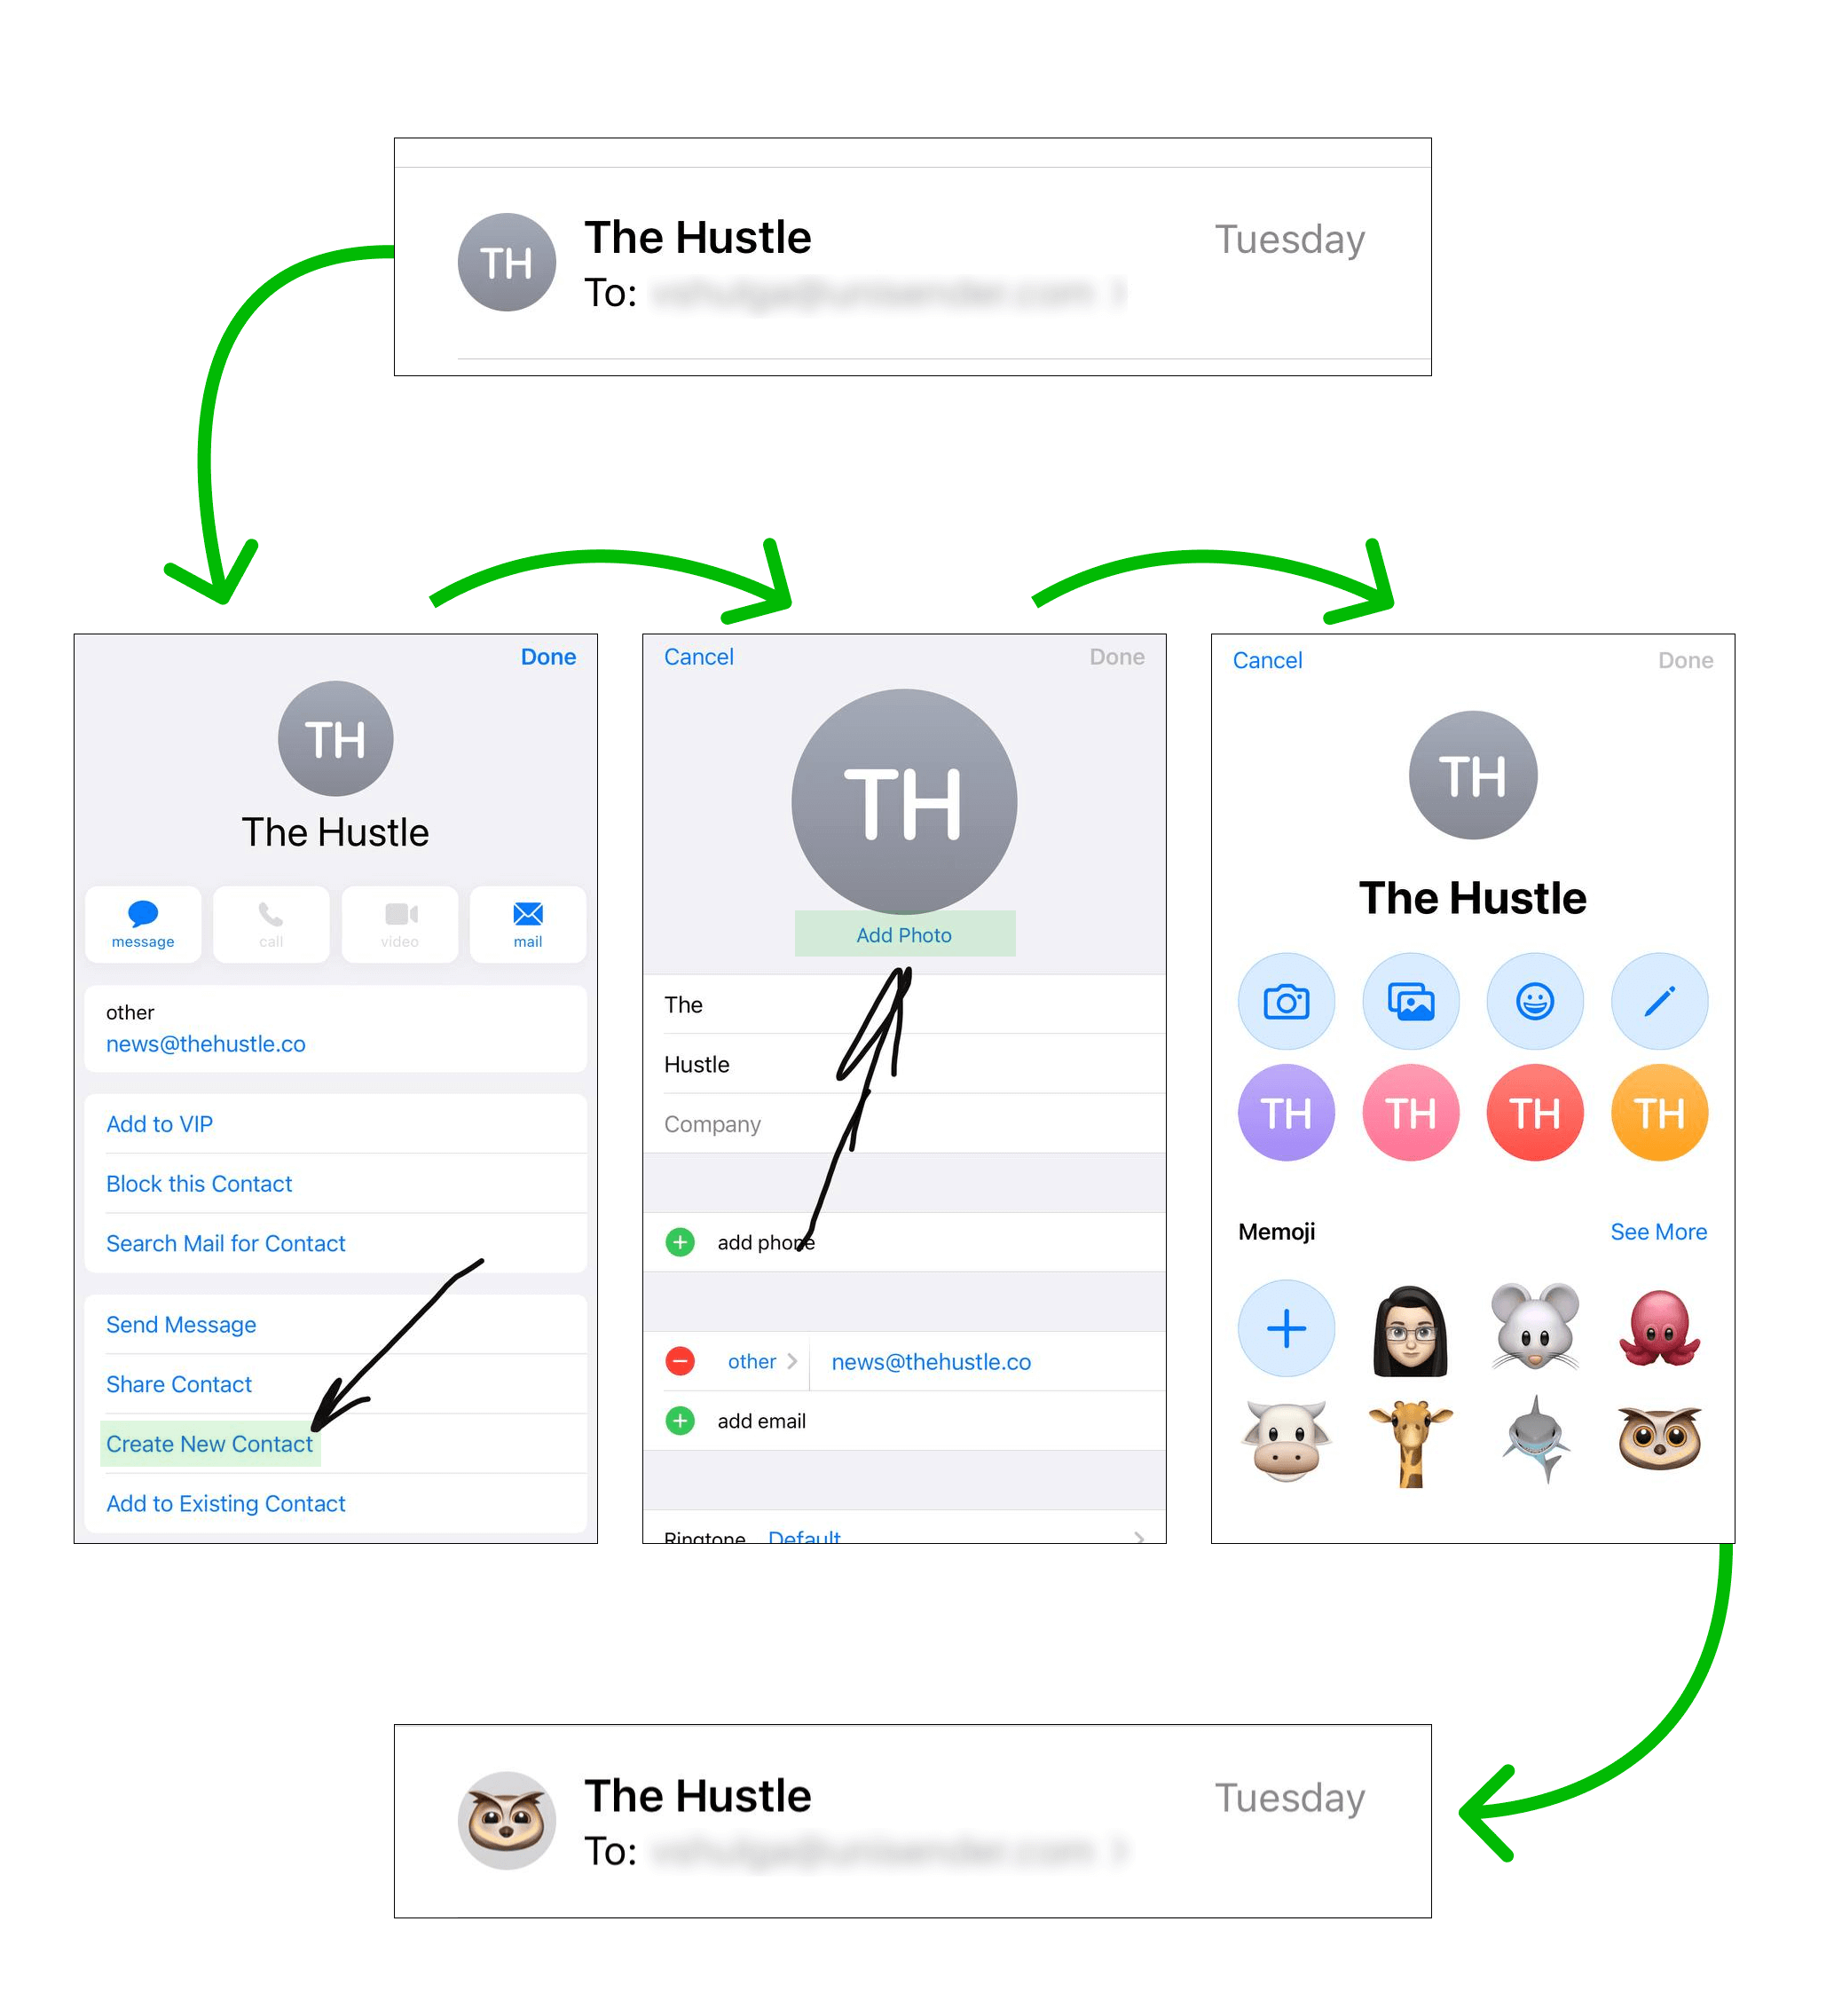 ow to add avatars in Apple Mail